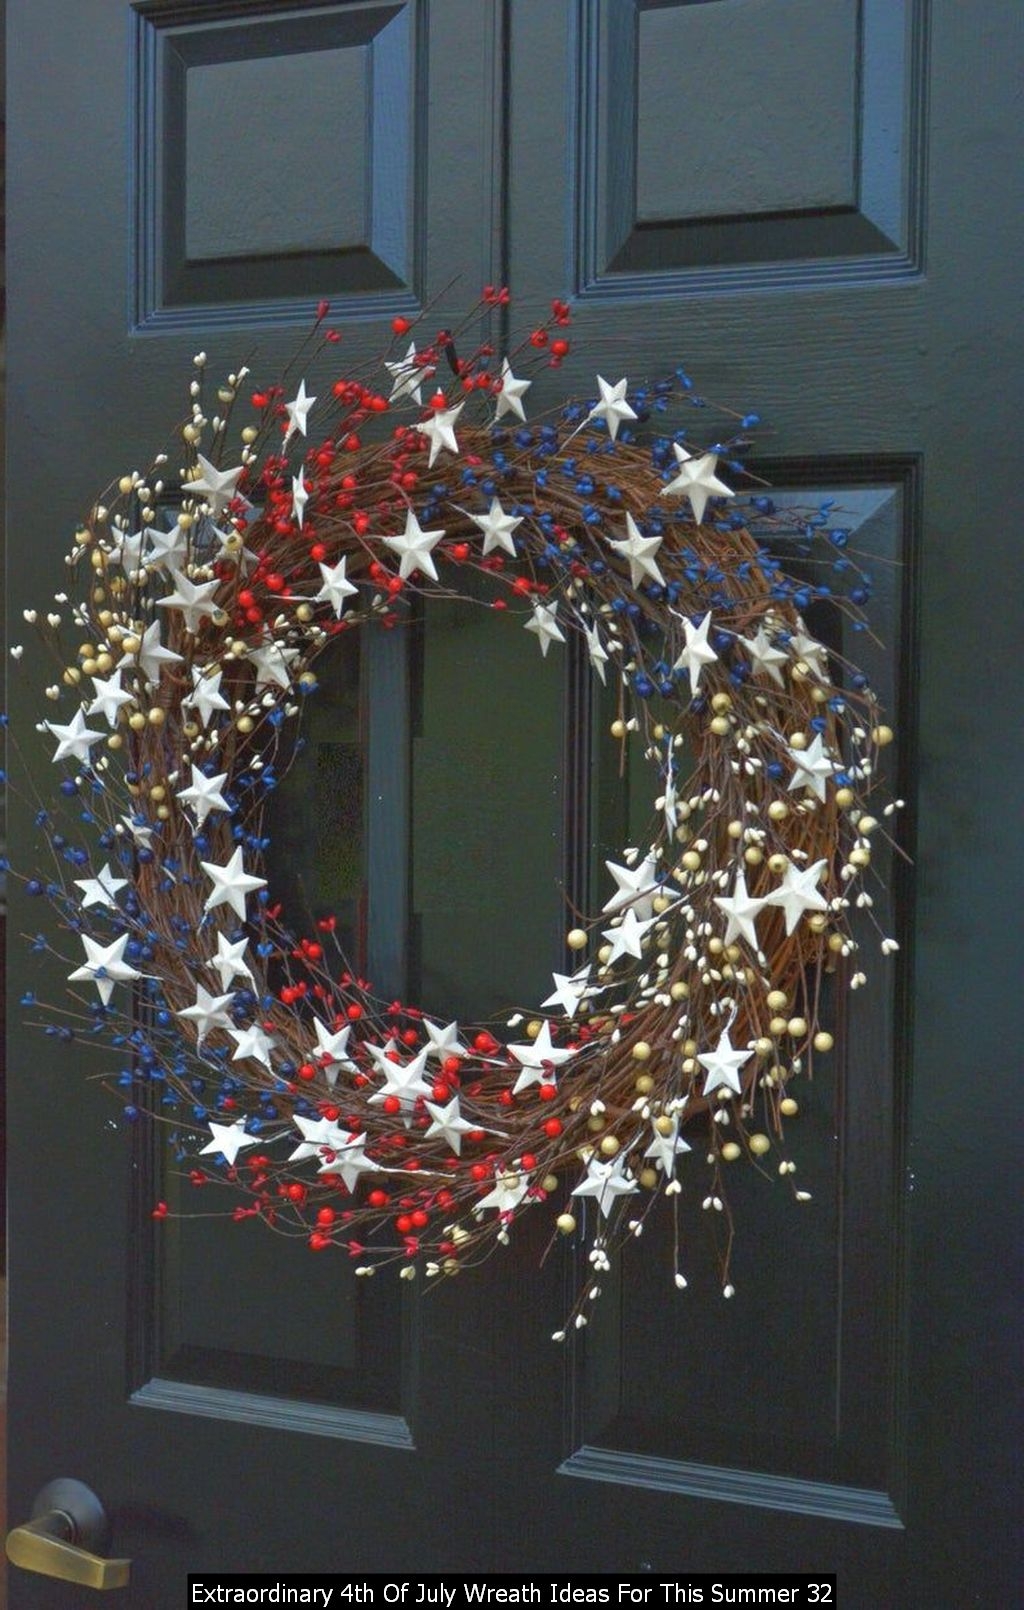 Extraordinary 4th Of July Wreath Ideas For This Summer 32